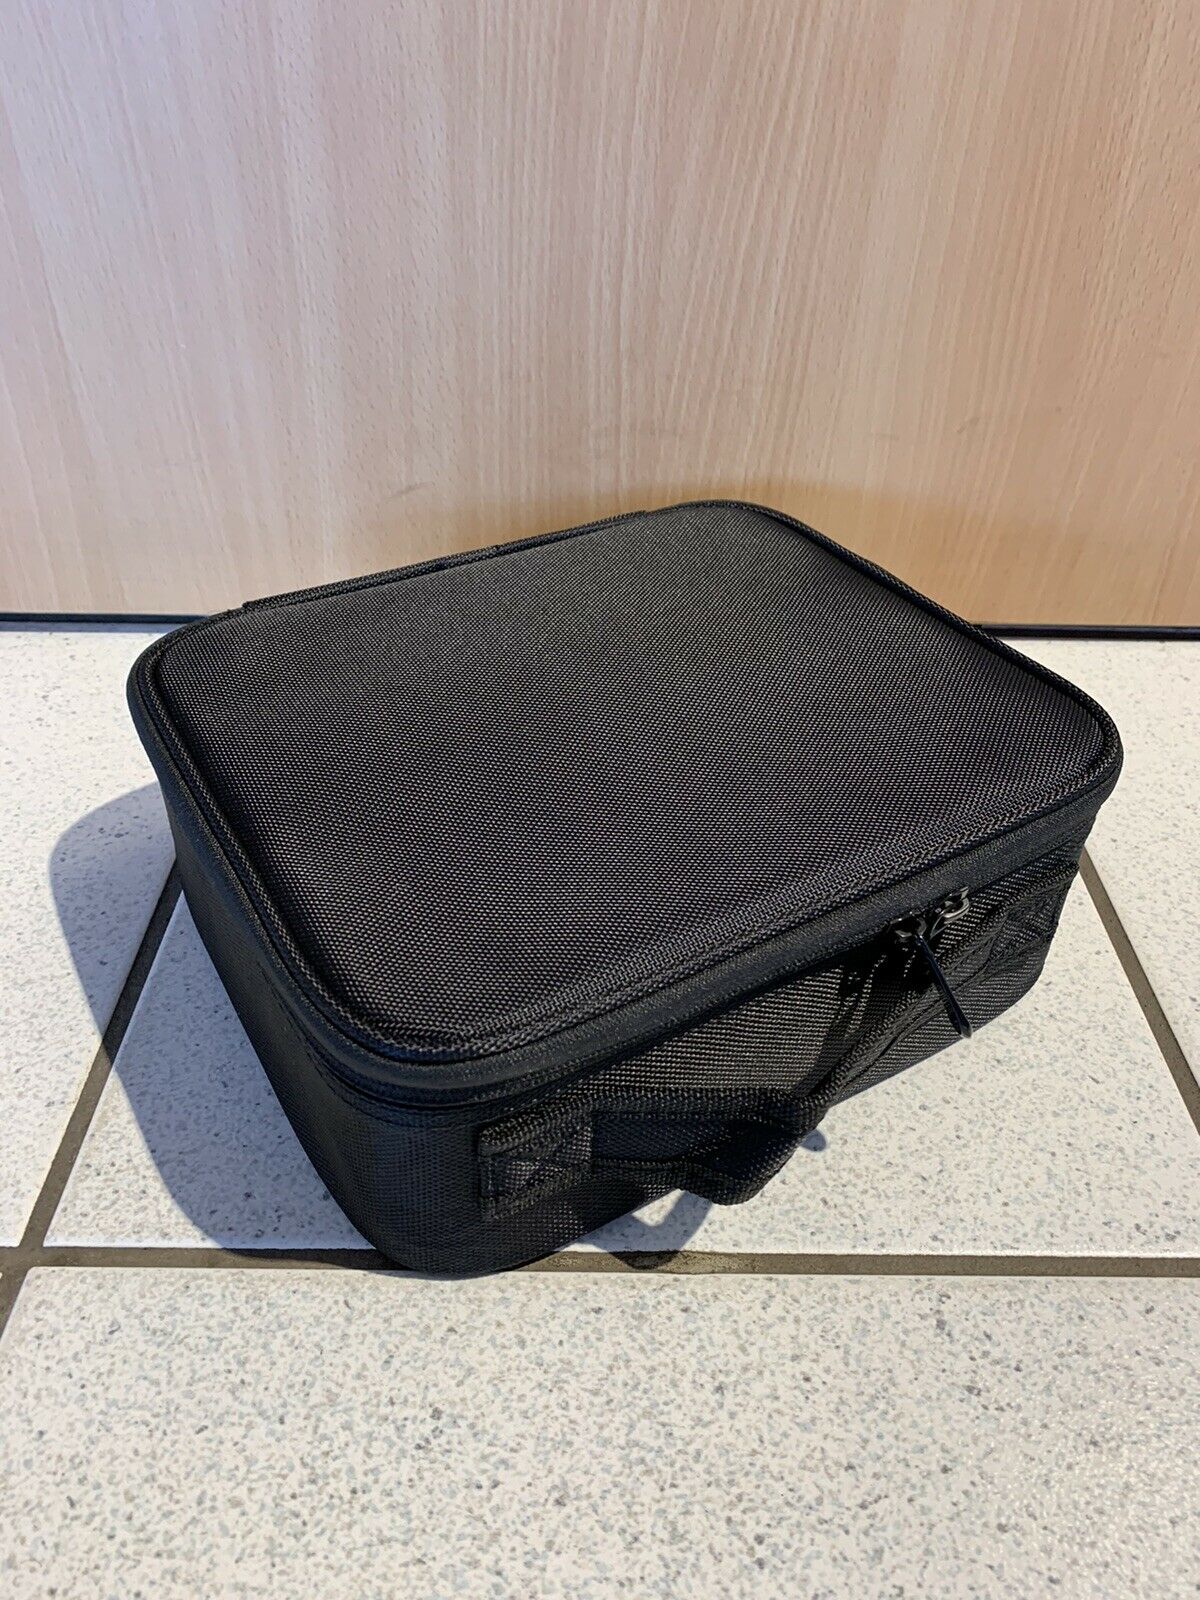 NEW Small 10" 26cm BLACK Protective FLYING DRONE Hard Bag Carry Case Holder